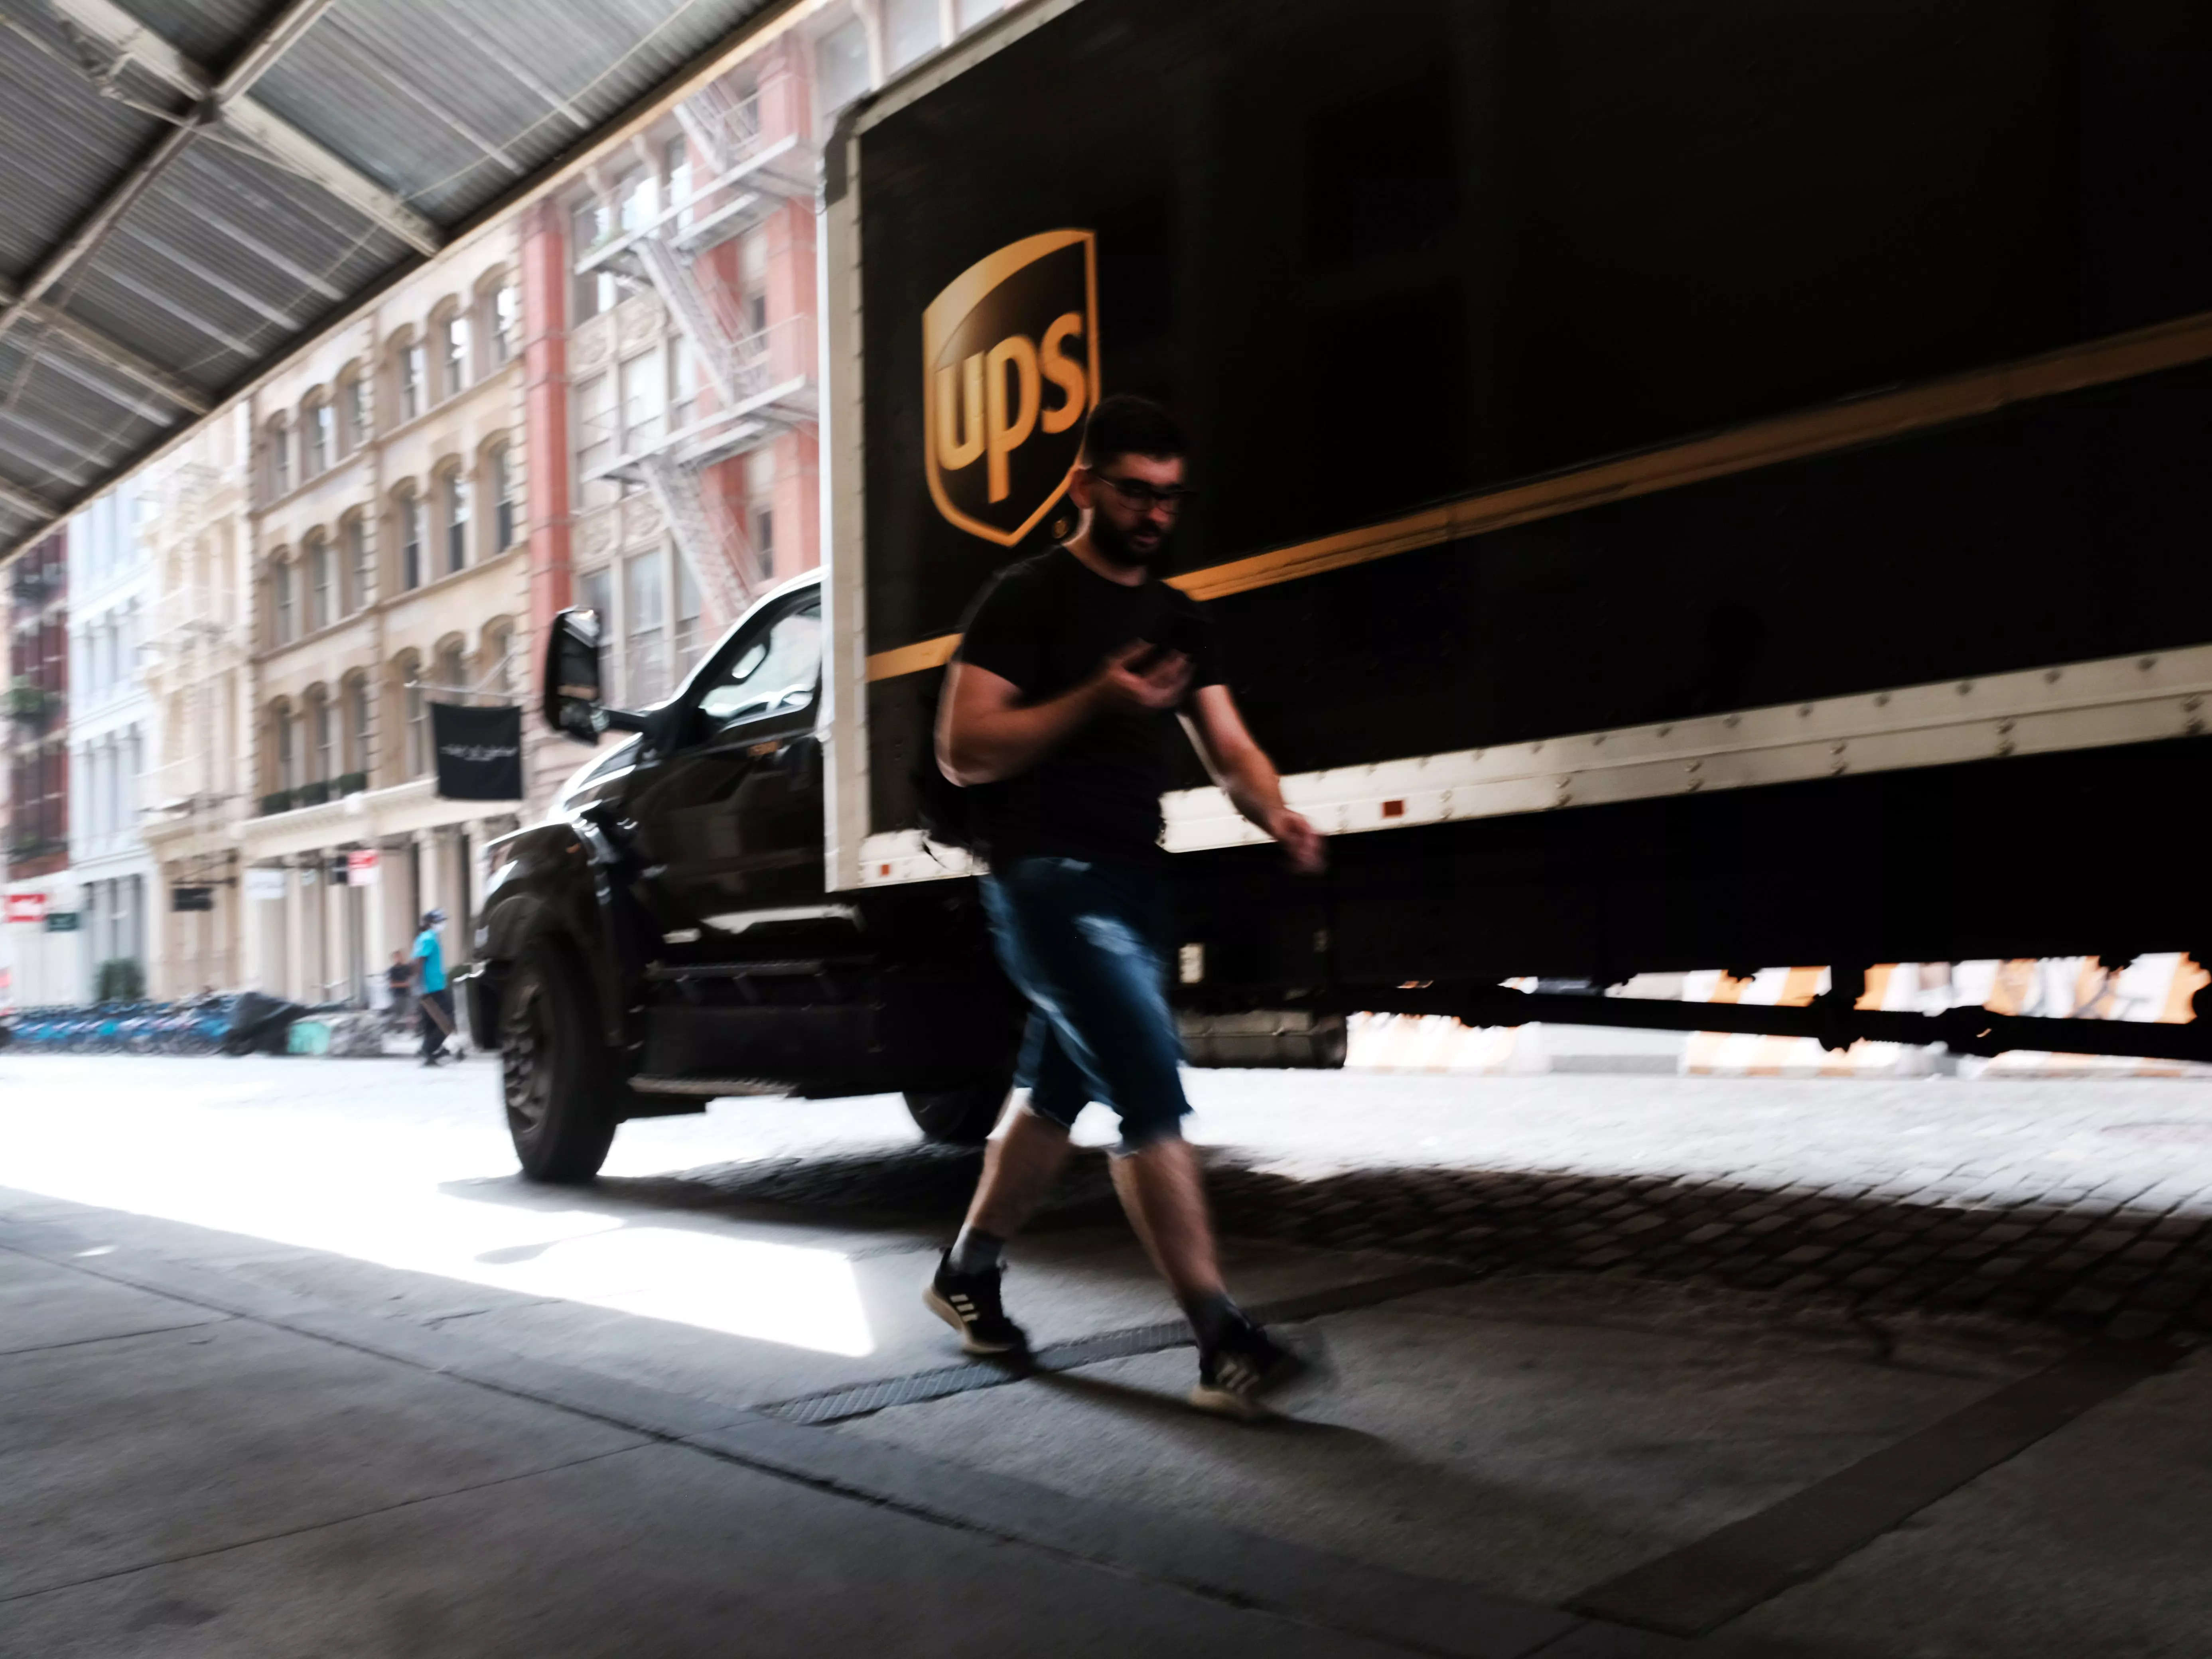 A UPS driver posted their $2,400 weekly paycheck to Reddit